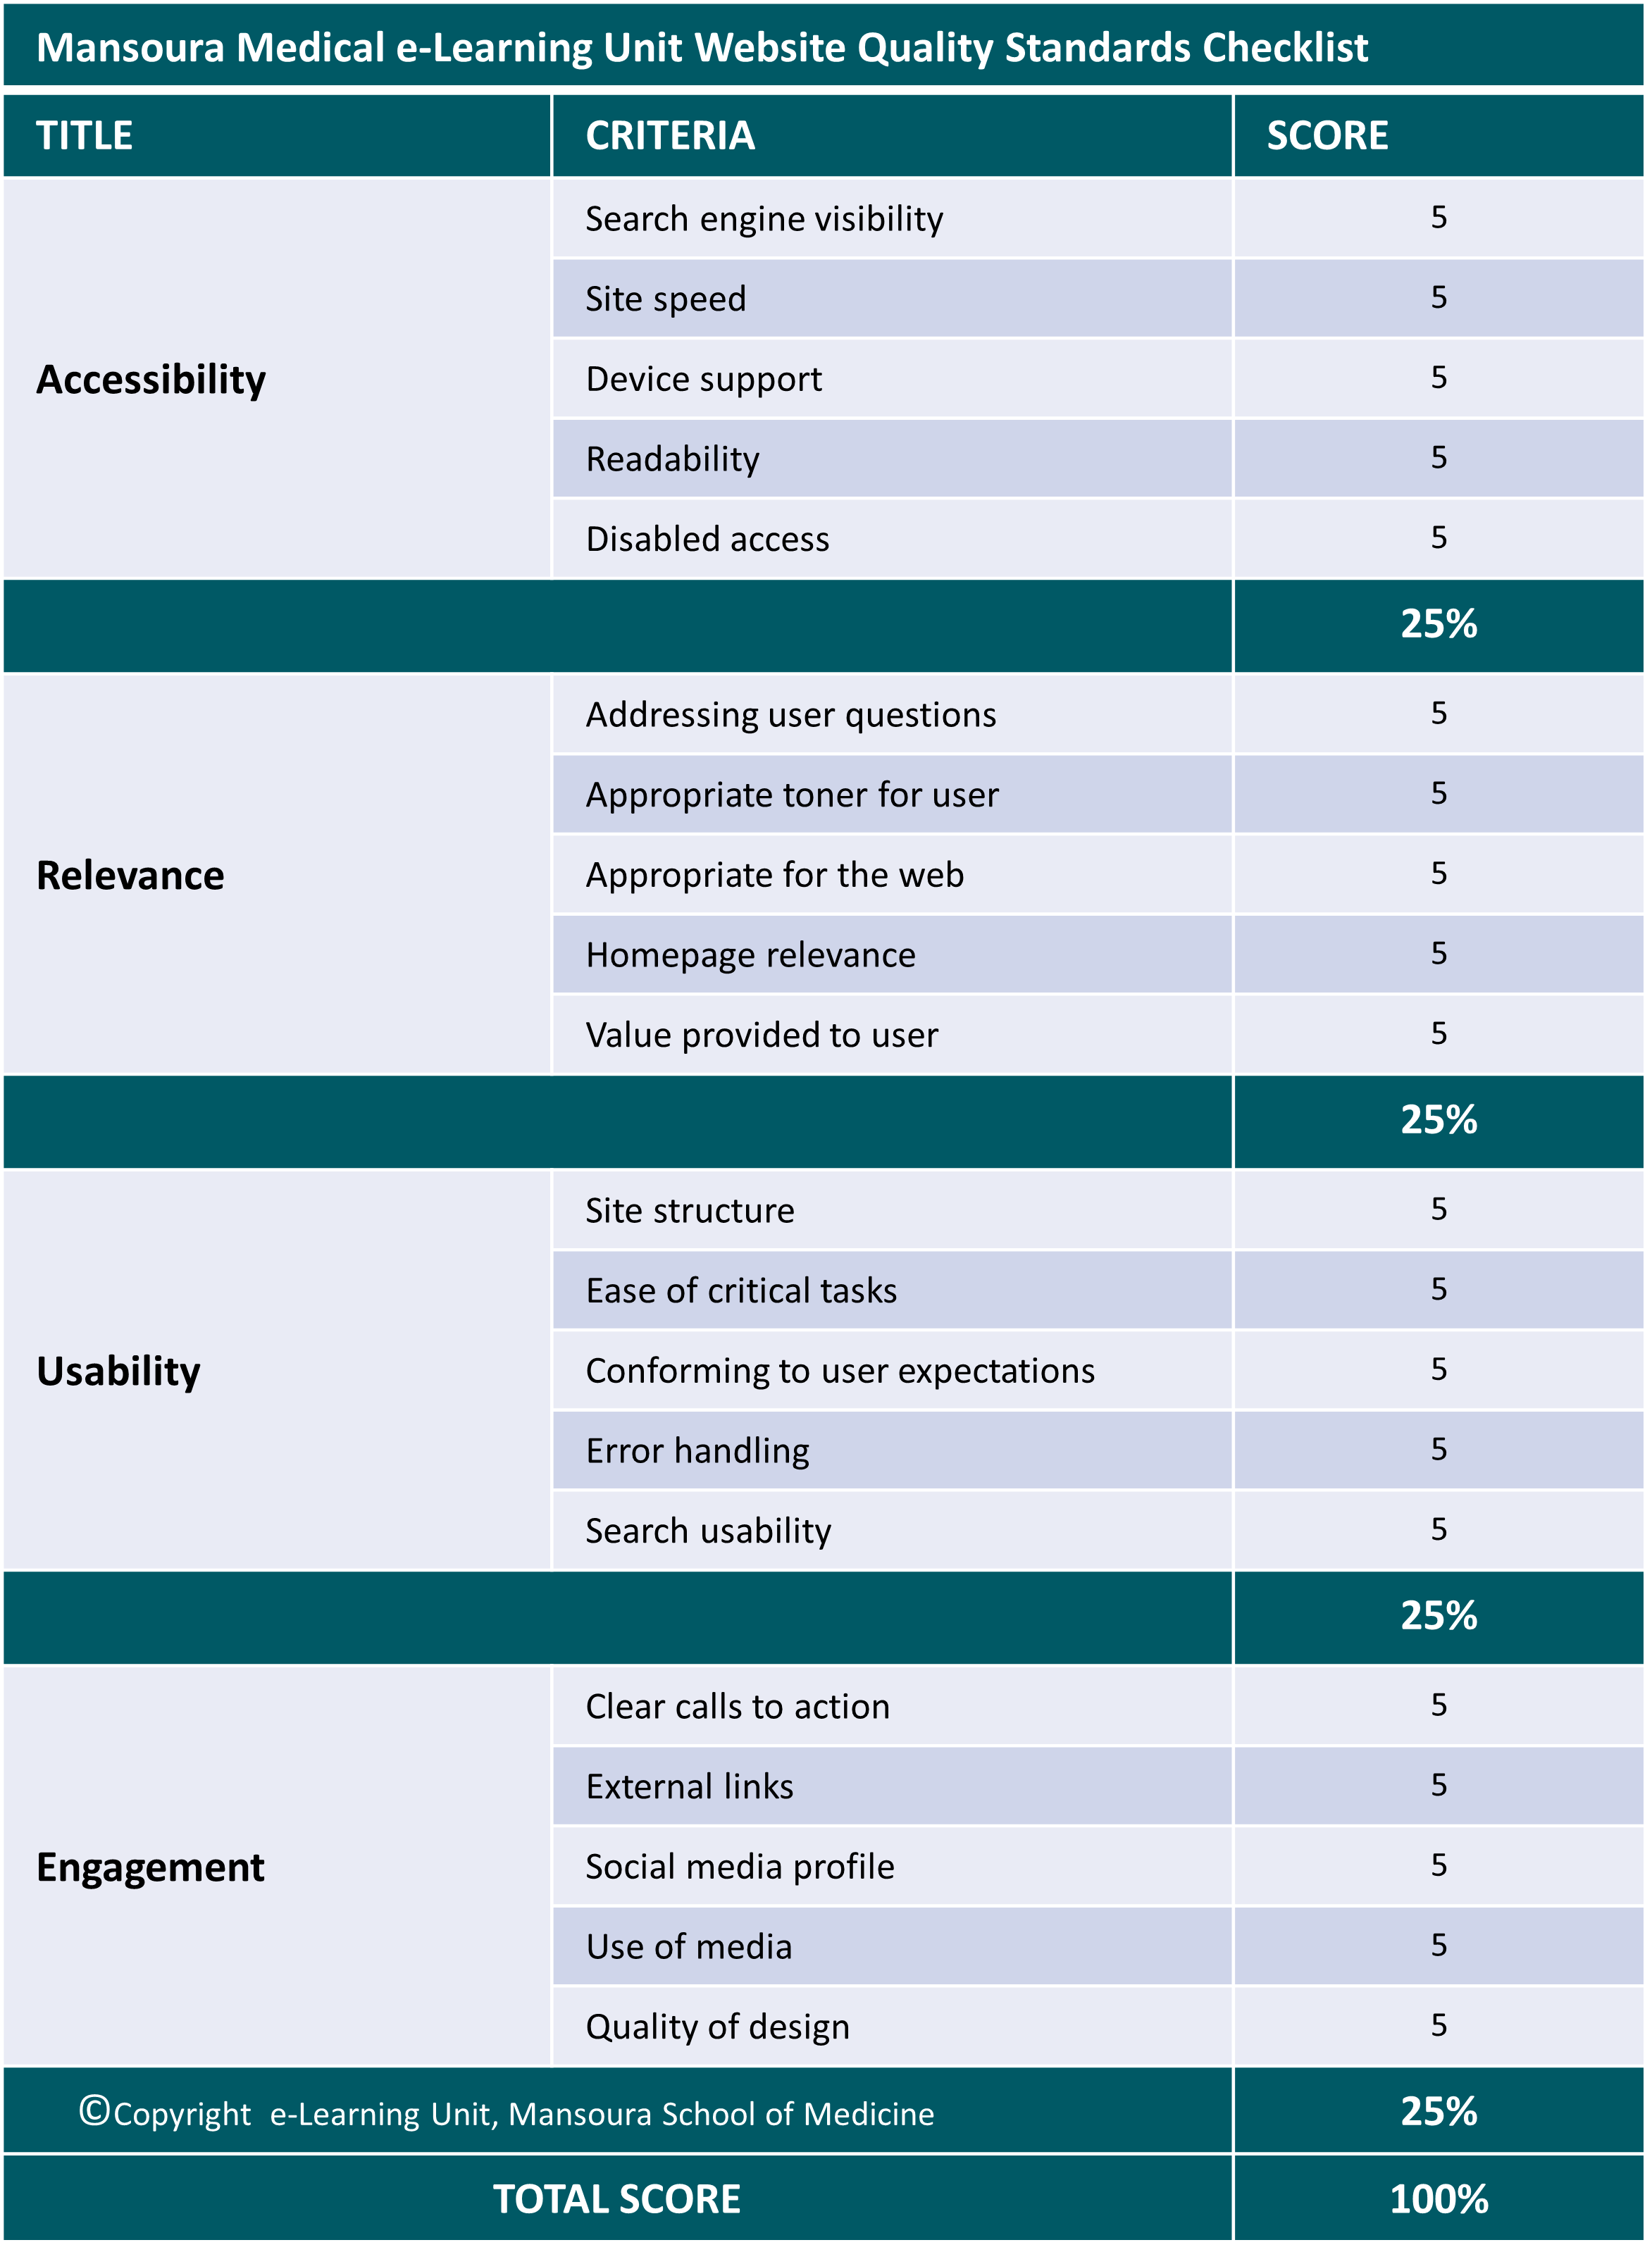 Website quality table